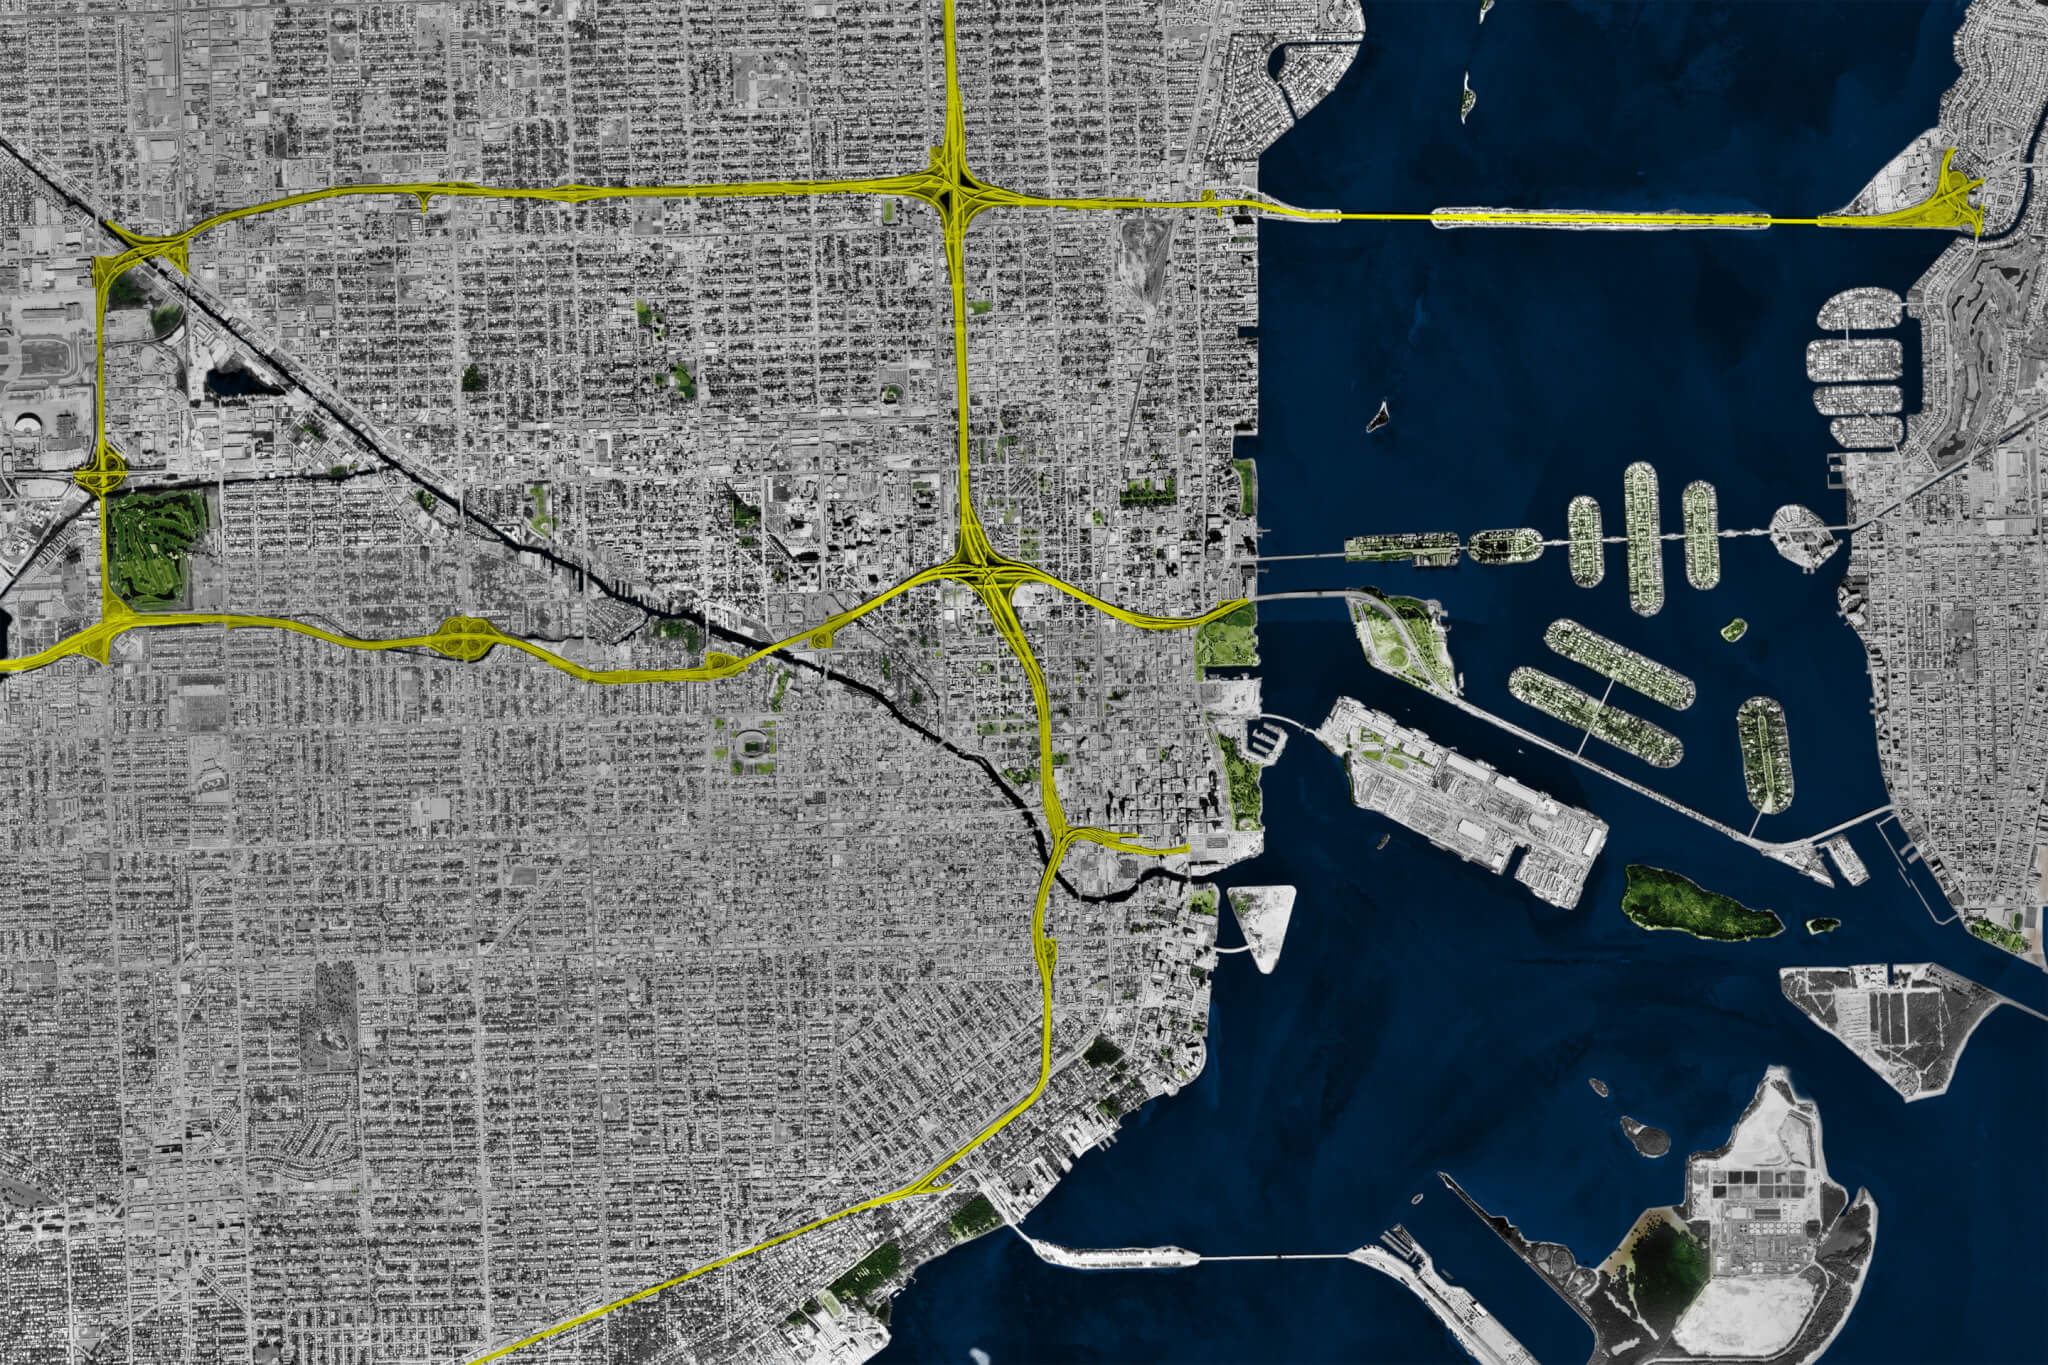 Segregation by Design maps highway expansion in Florida's Magic City